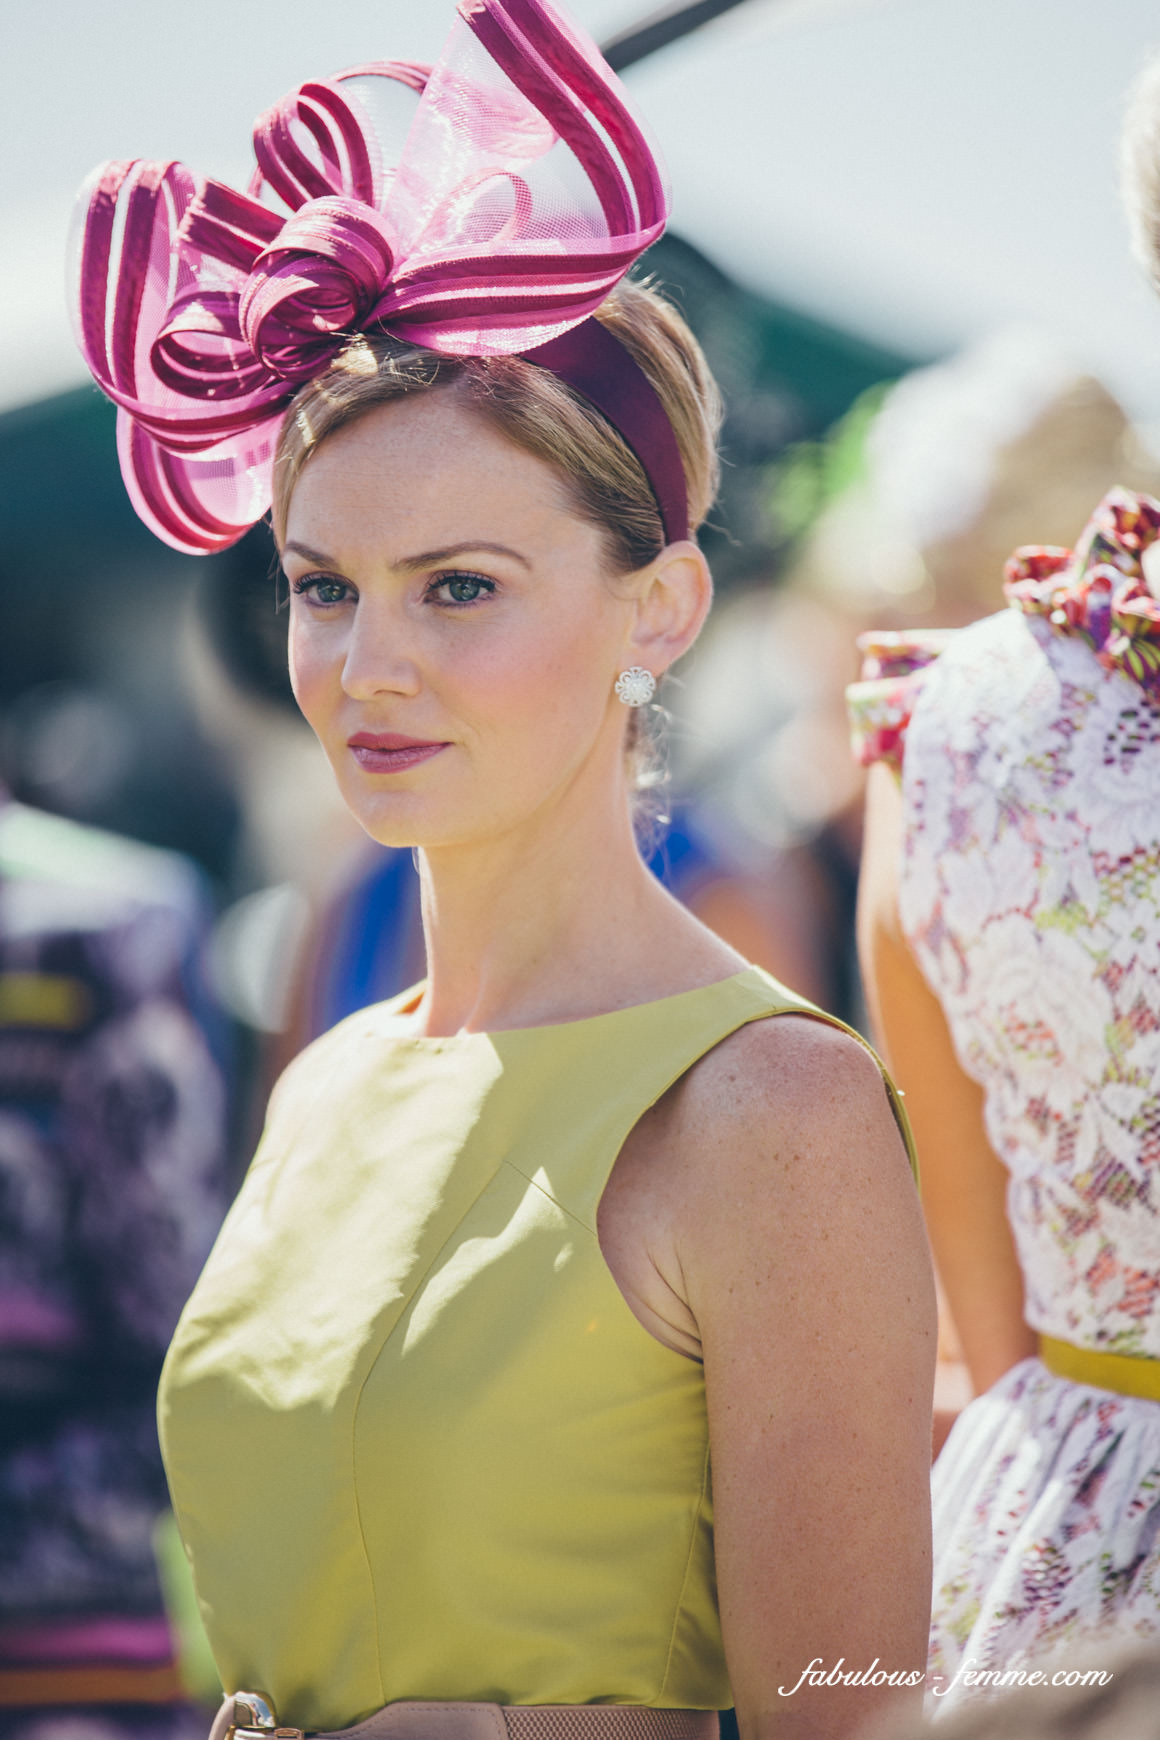 photos of spring fashion at melbourne cup, australia